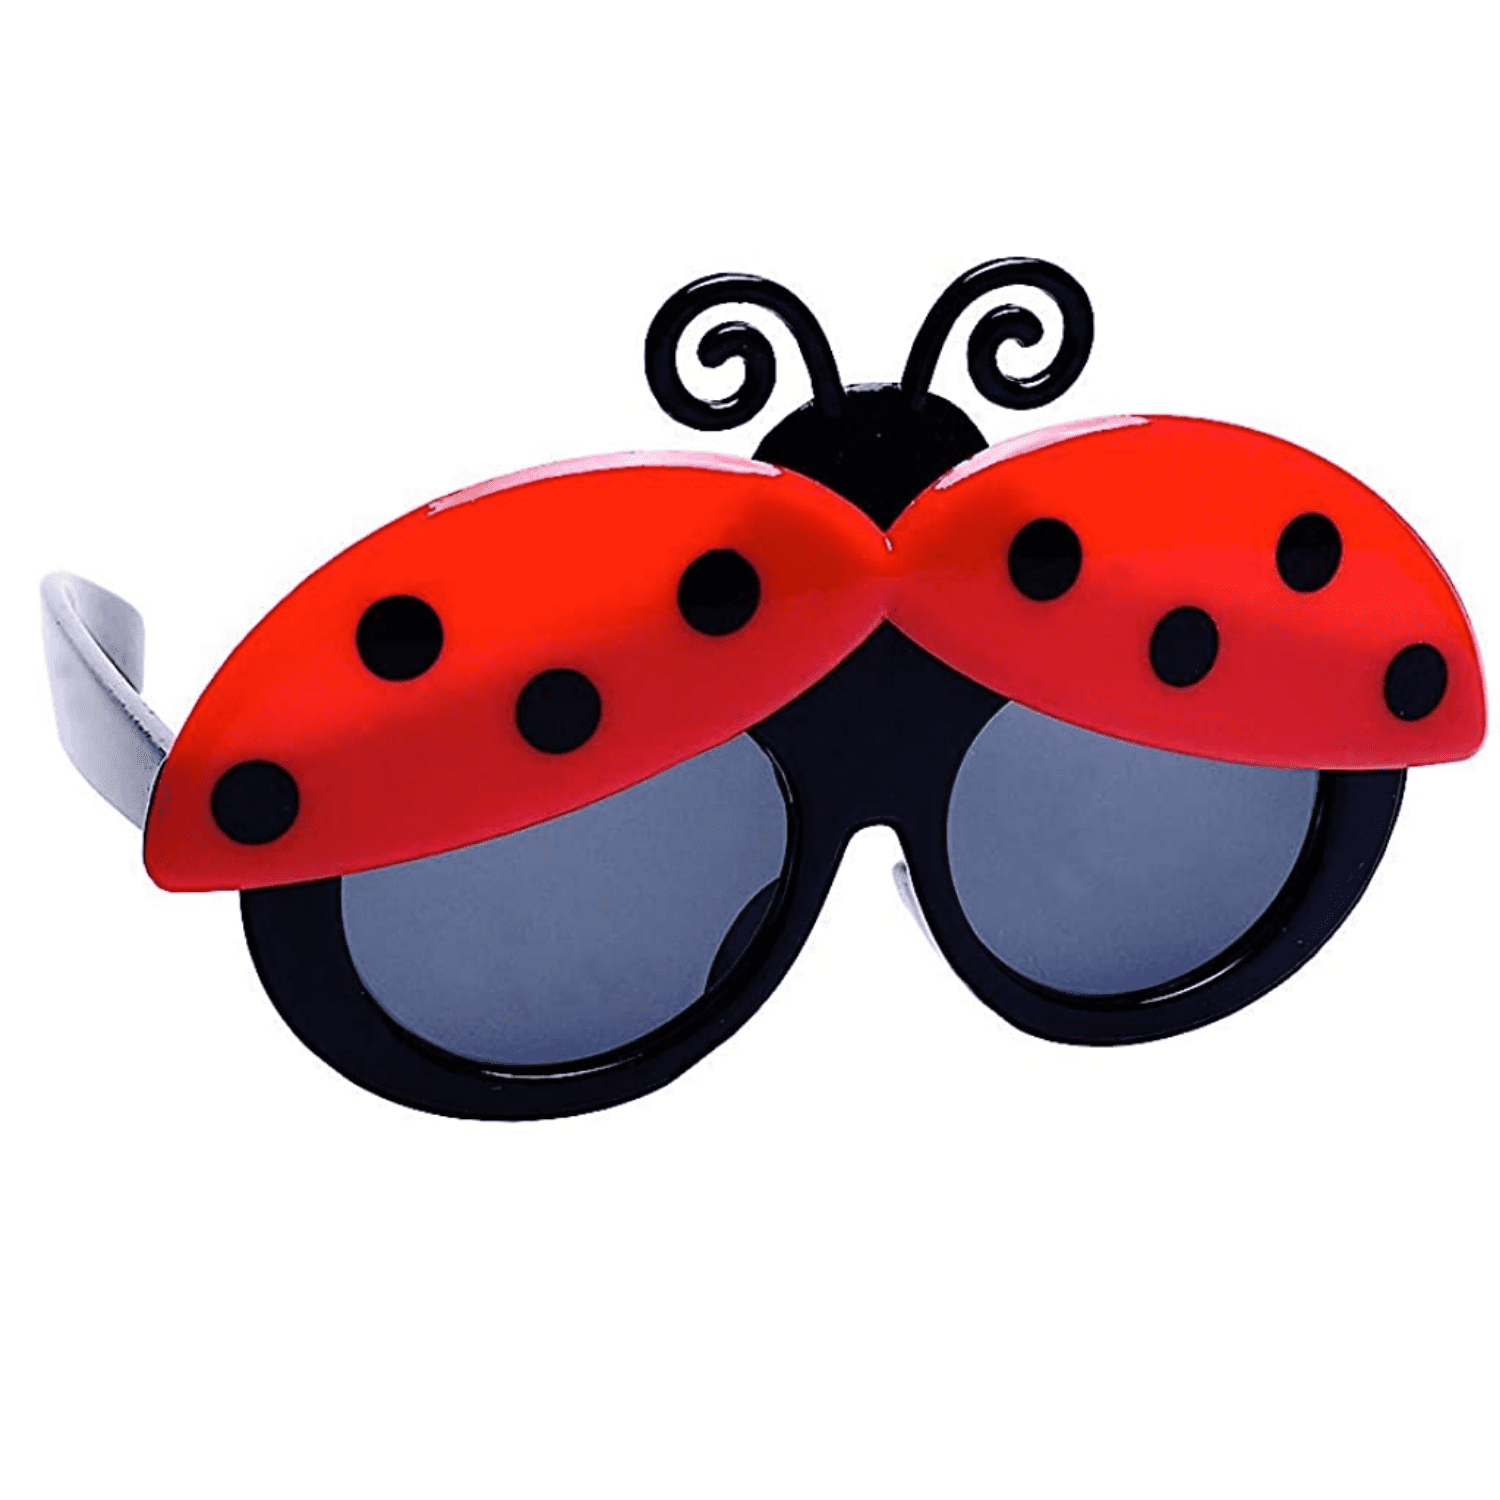 NS Ladybug Sunglasses 100% UV Shatter Resistant Eye Glasses Great for Kids  Girls Summer Beach Outdoor Eye Protection Shades & Fashion Accessories -  